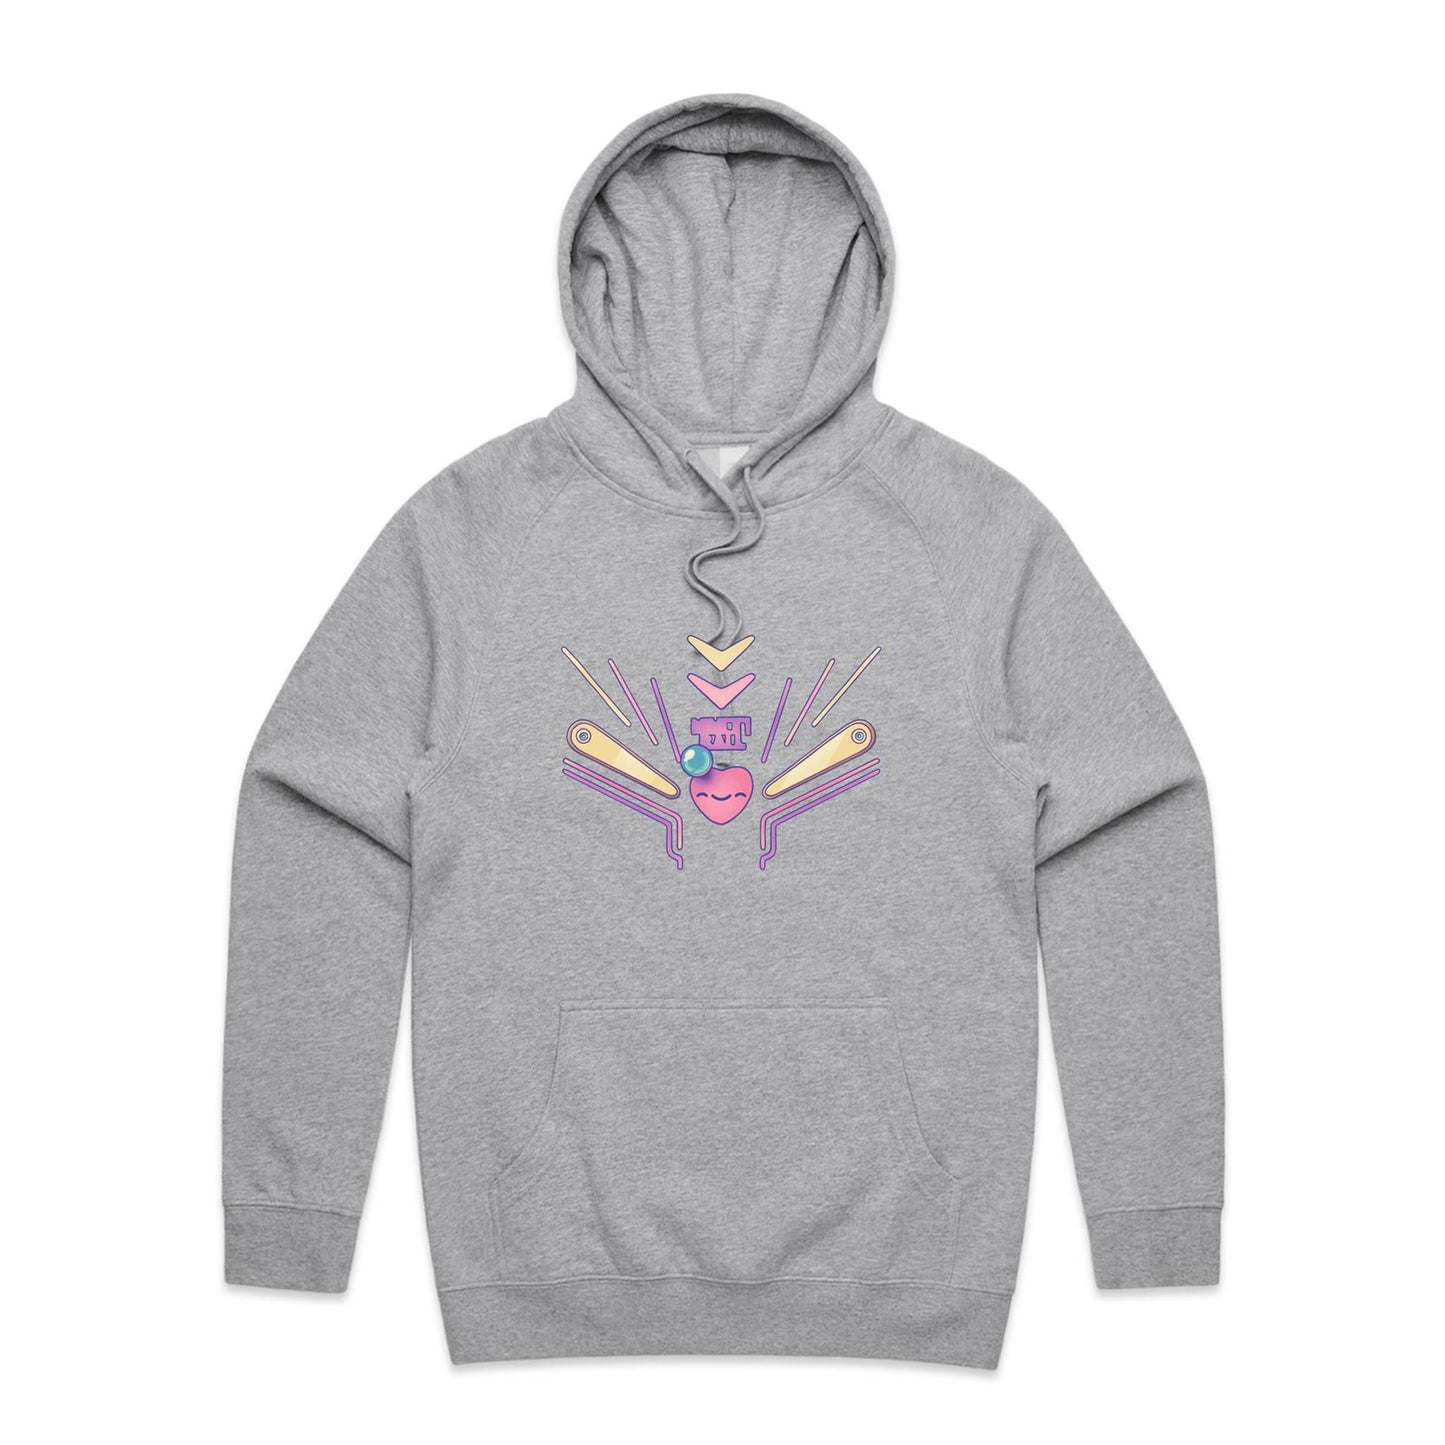 By the Pin of your Teeth - Unisex Hoodie